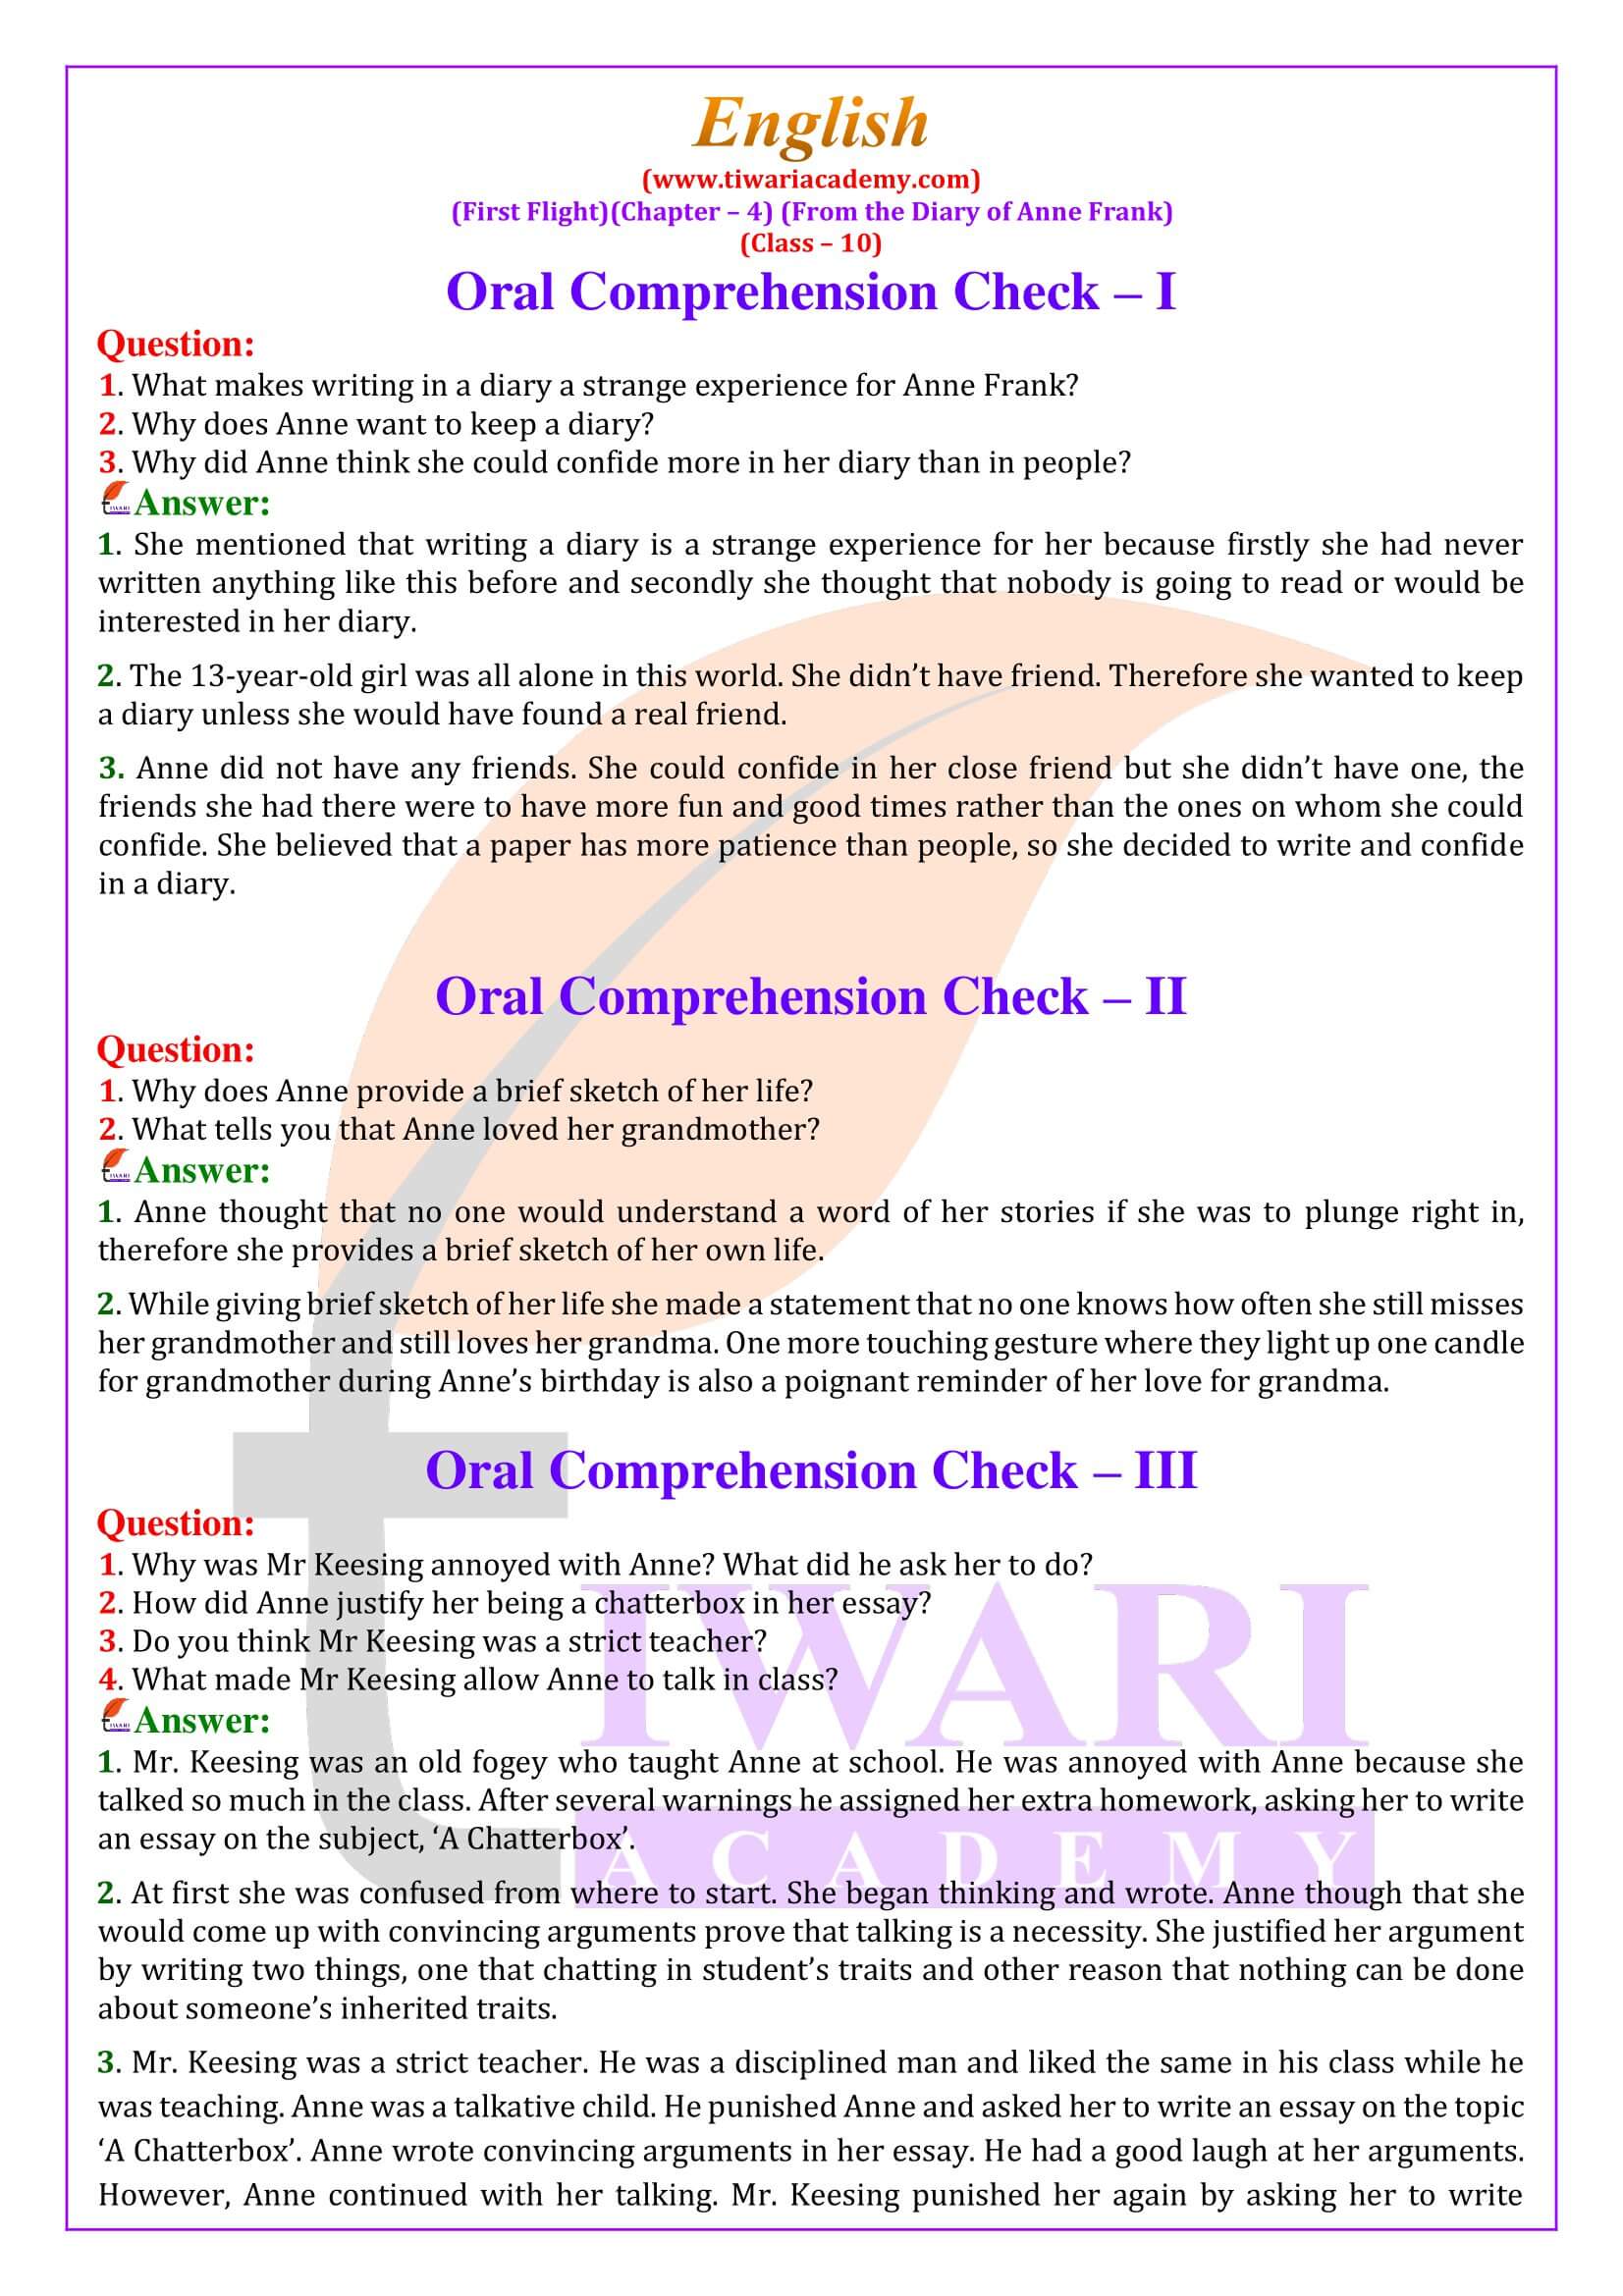 NCERT Solutions for Class 10 English First Flight Chapter 4 From the Diary of Anne Frank